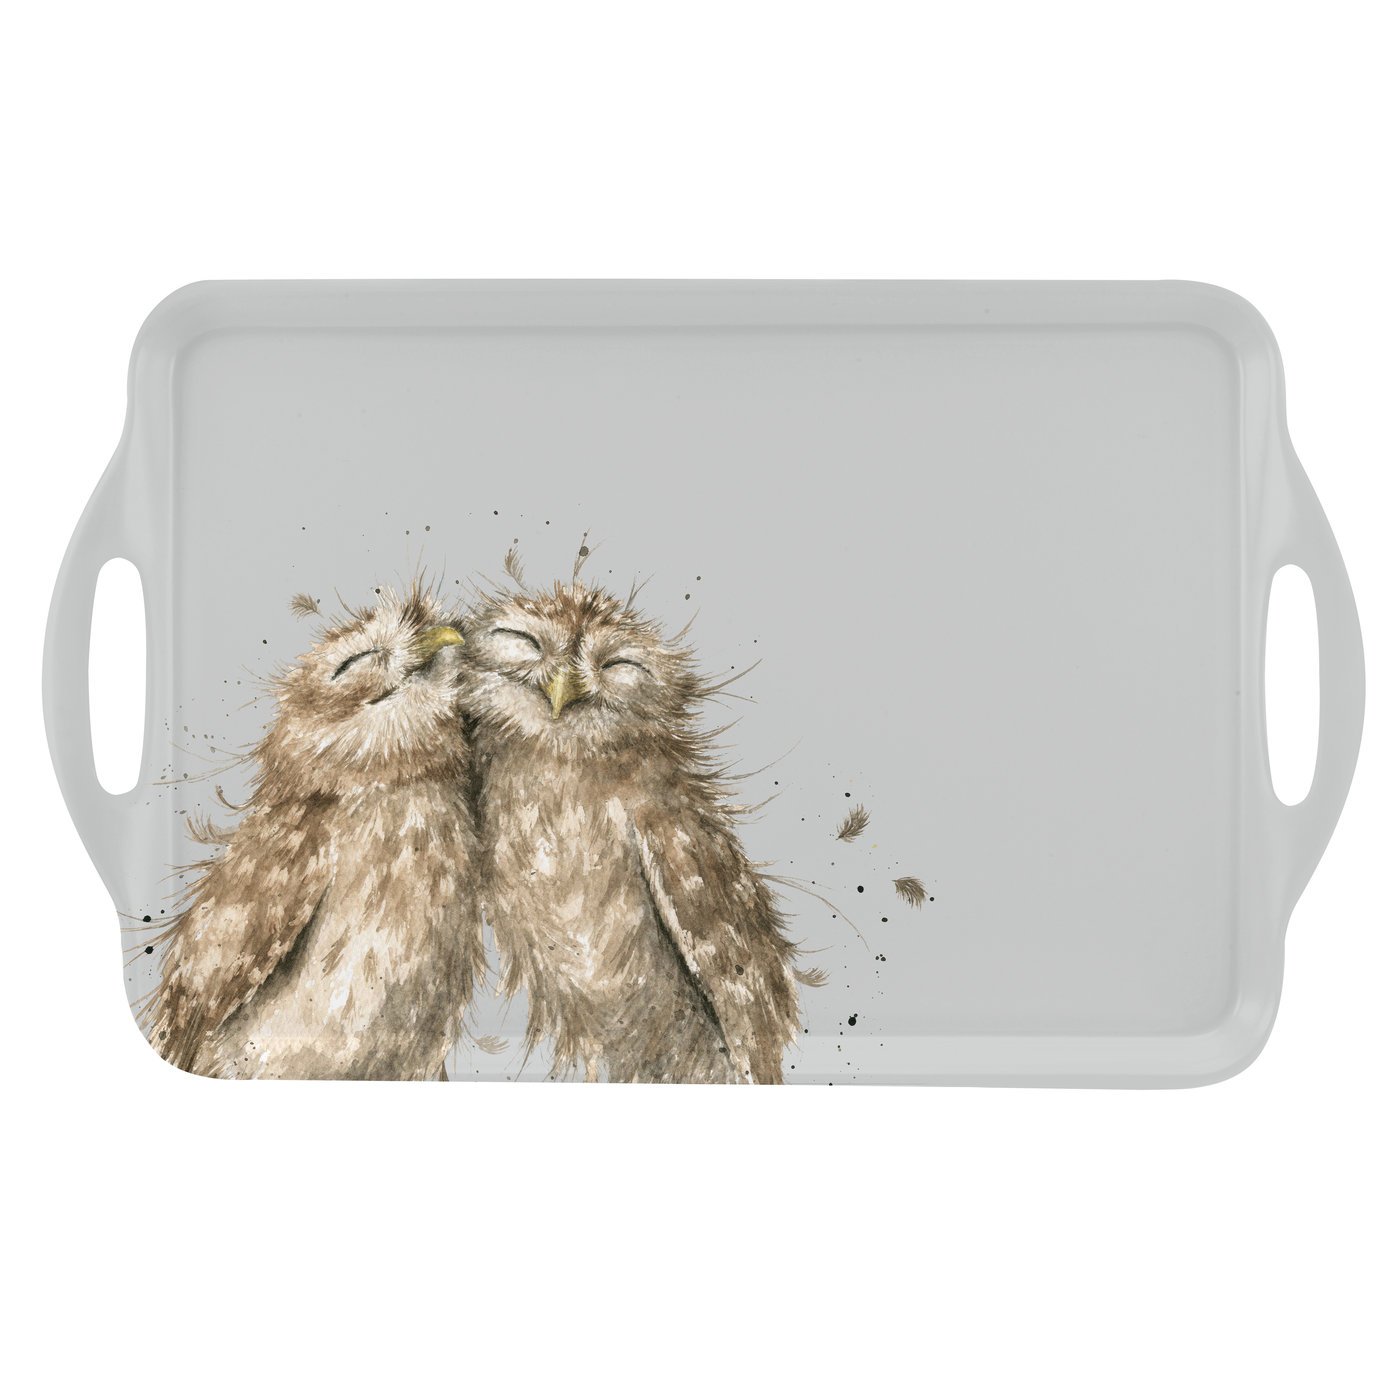 Portmeirion Home & Gifts Wrendale Large Handled Tray (Owl), 20 x 29.5 x 48 cm, Multi Coloured